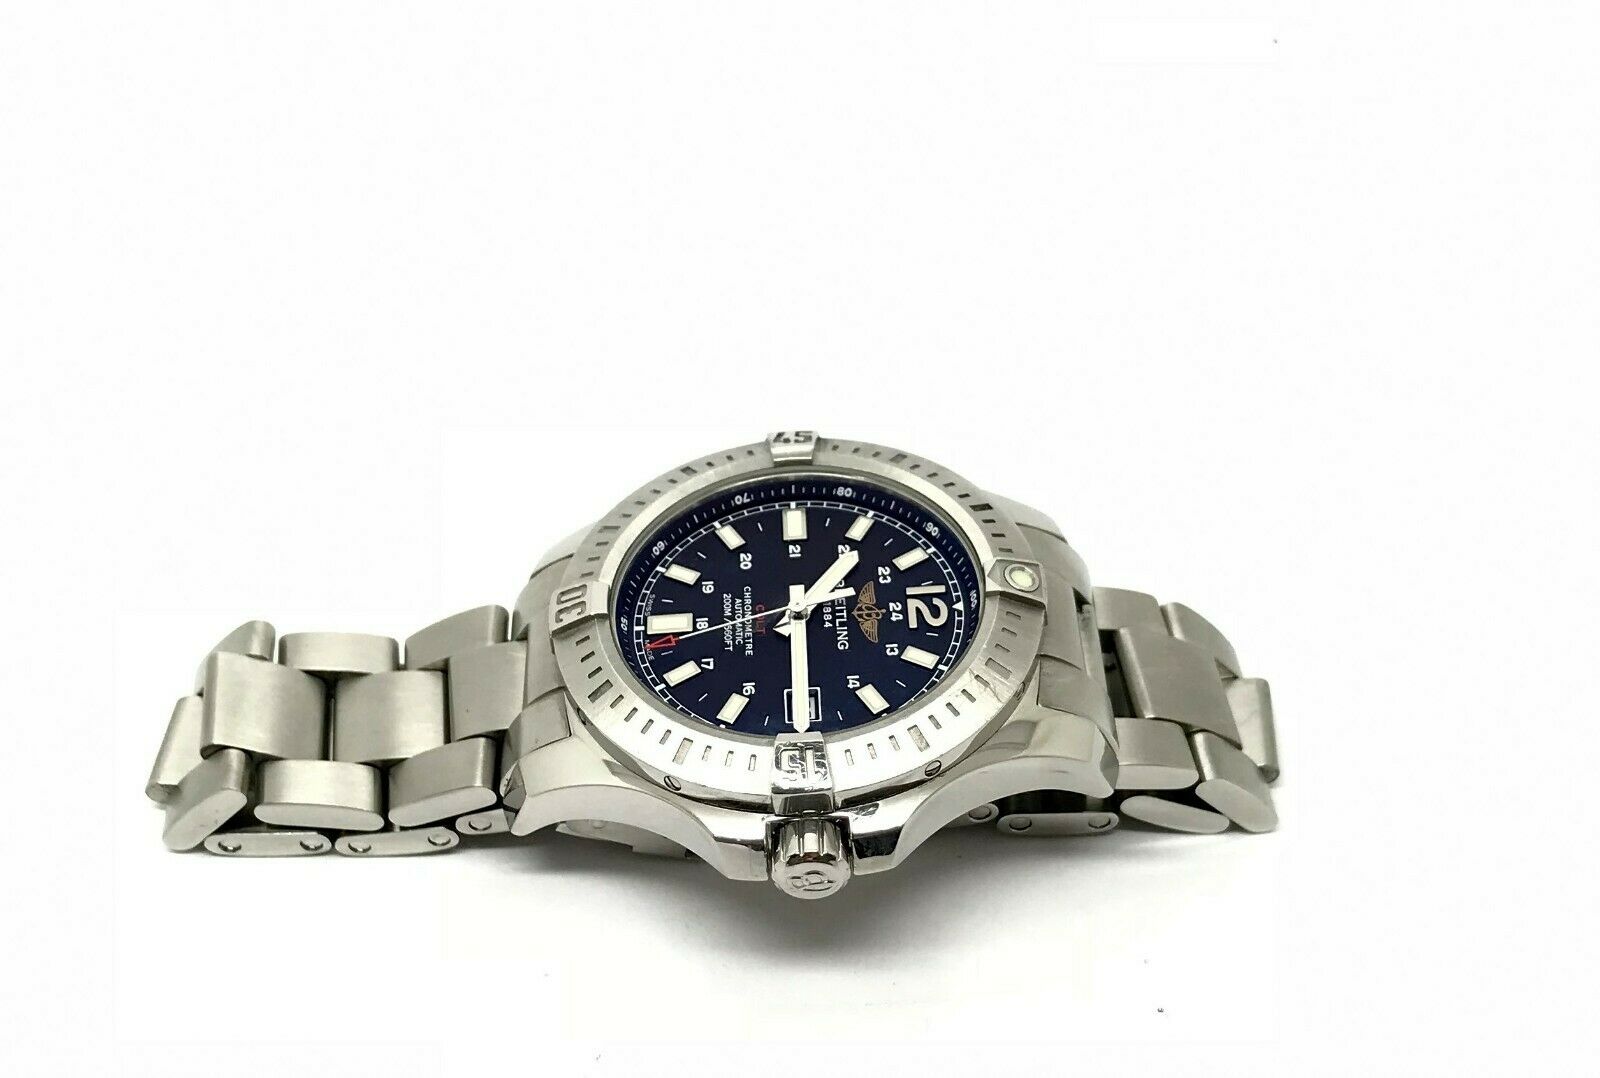 Breitling Colt Volcano Black Dial Steel Automatic Gents Watch - Image 10 of 11